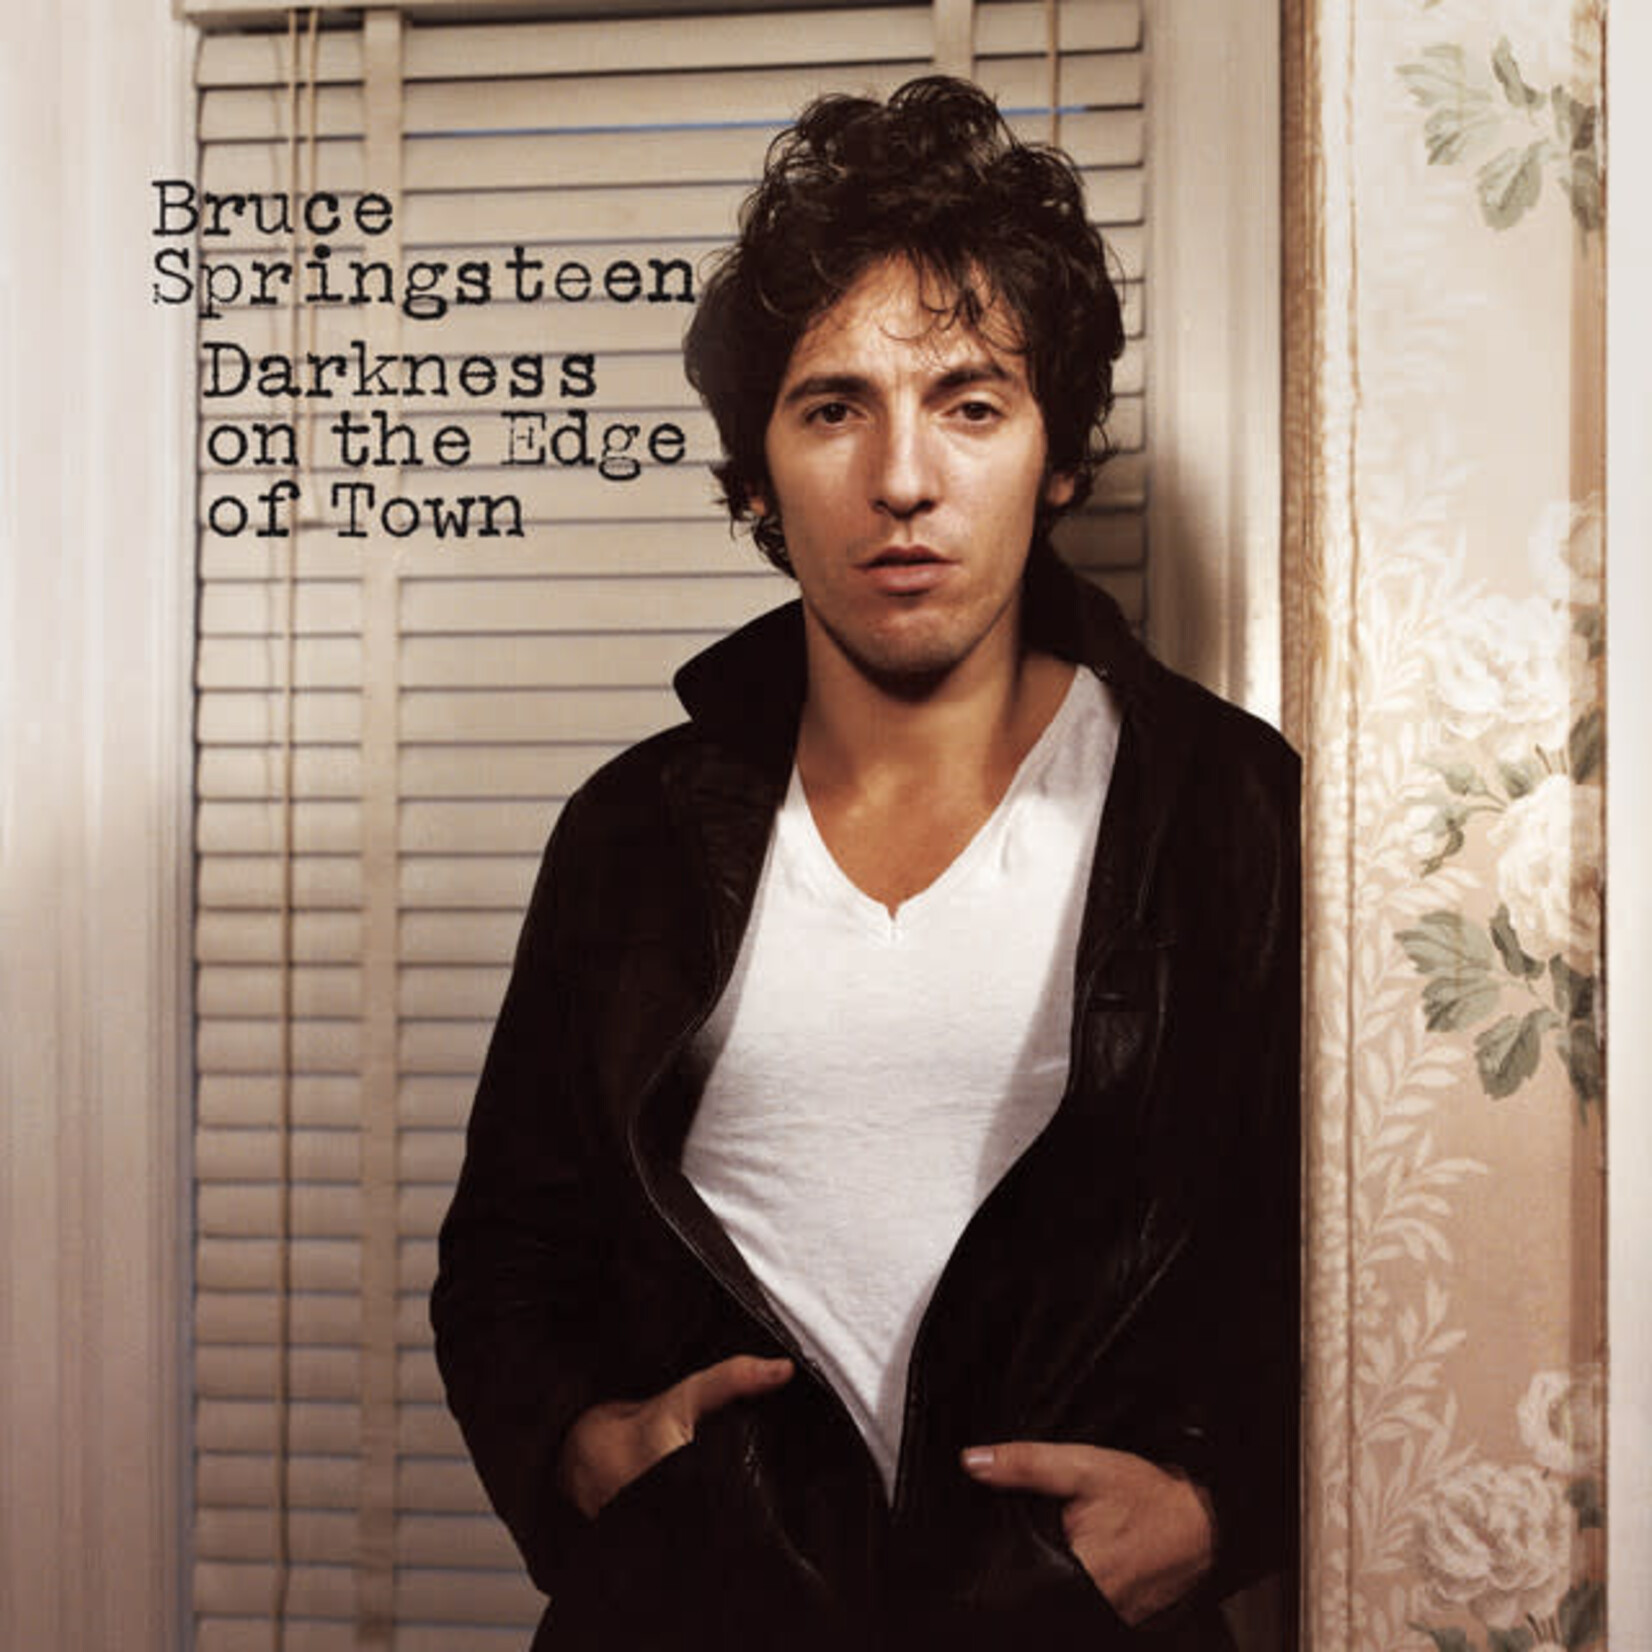 Bruce Springsteen - Darkness On The Edge Of Town [CD]